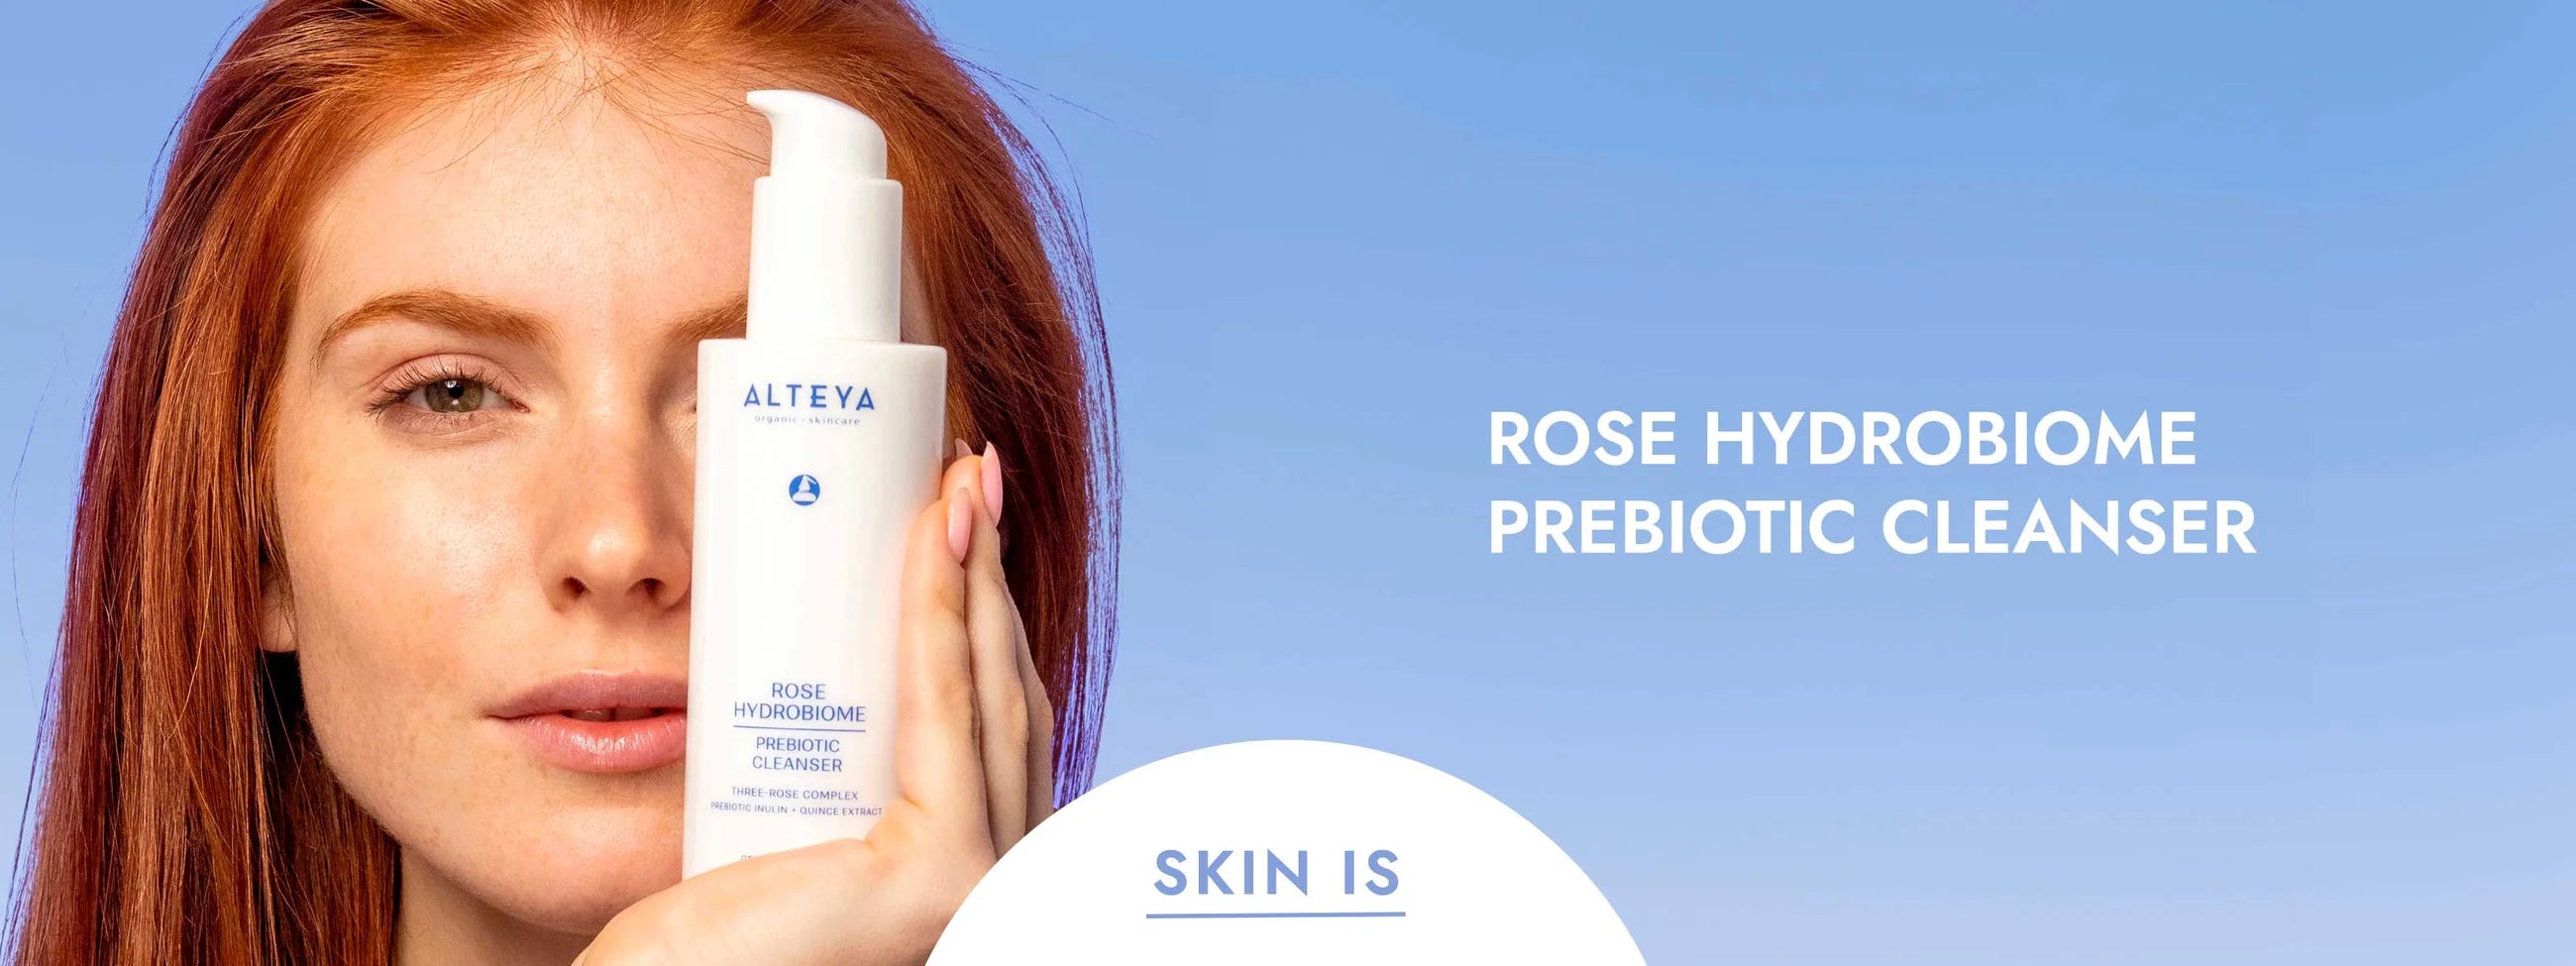 A woman is holding up a bottle of rose hydrome prebiotic cleanser.